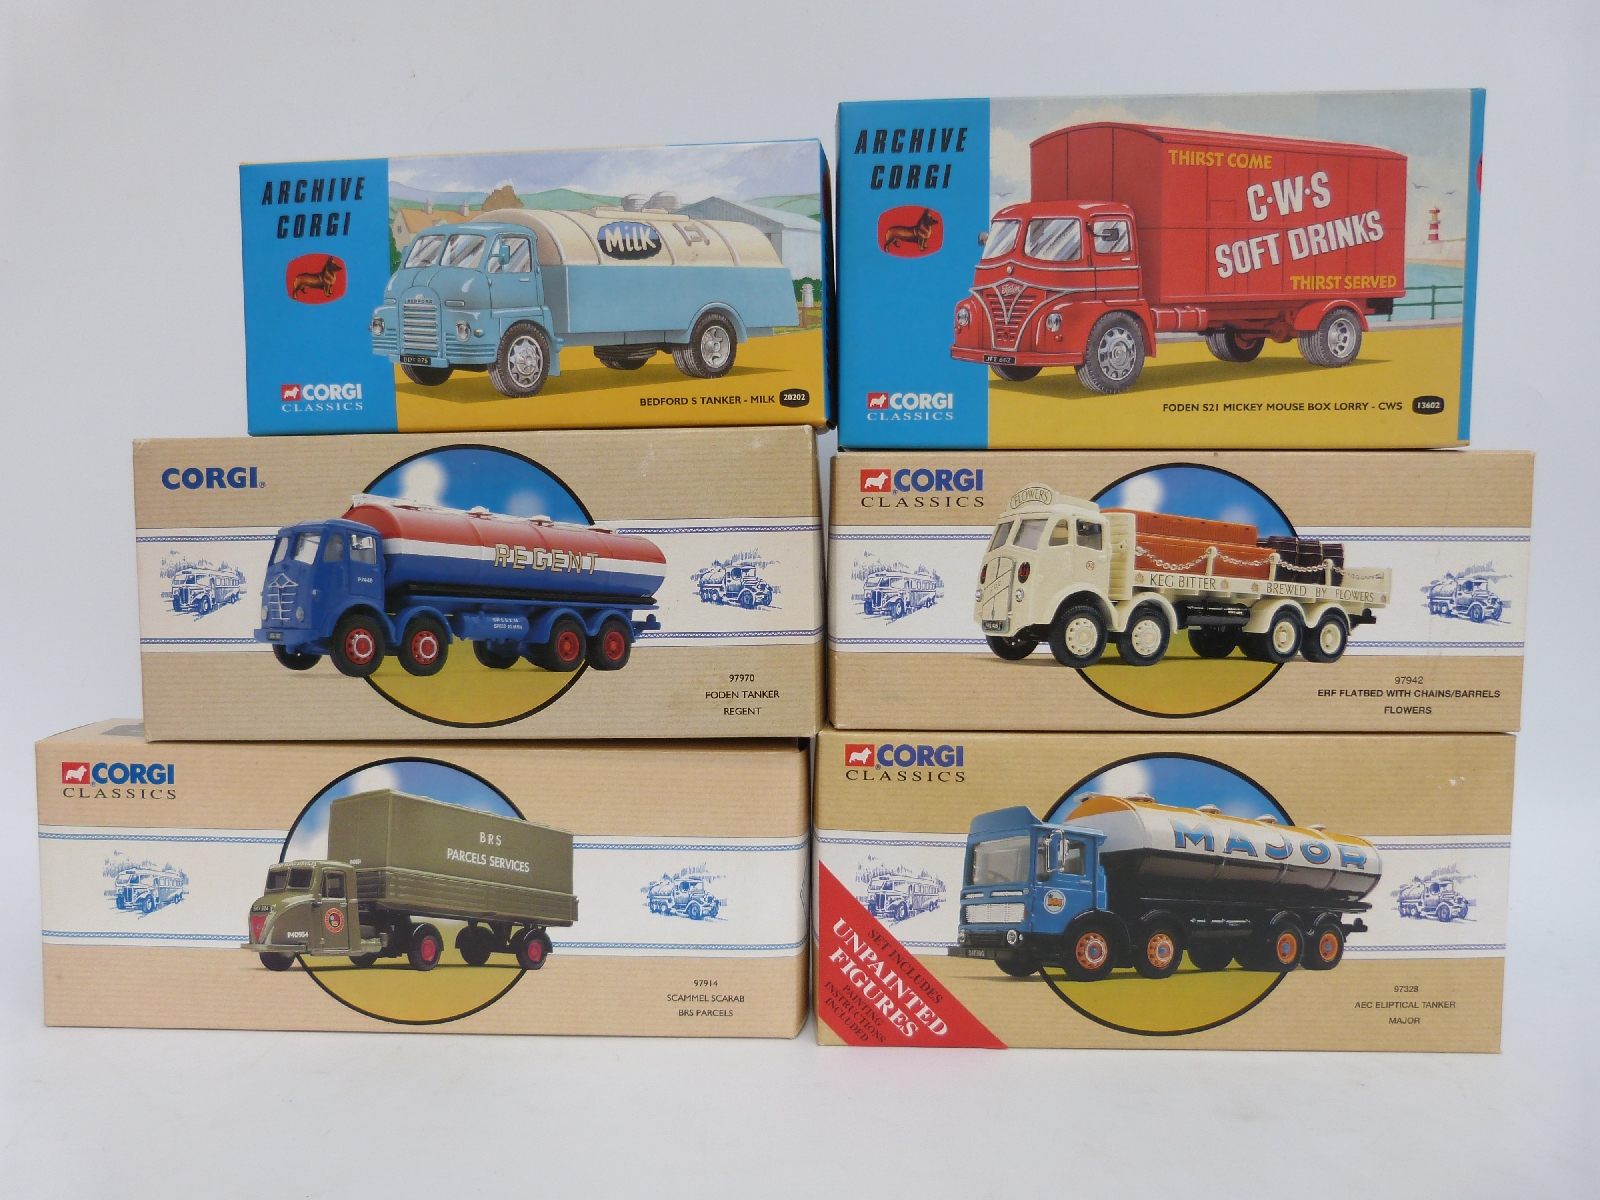 Six Corgi Road Transport and Archive Corgi diecast model commercial vehicles including Major and